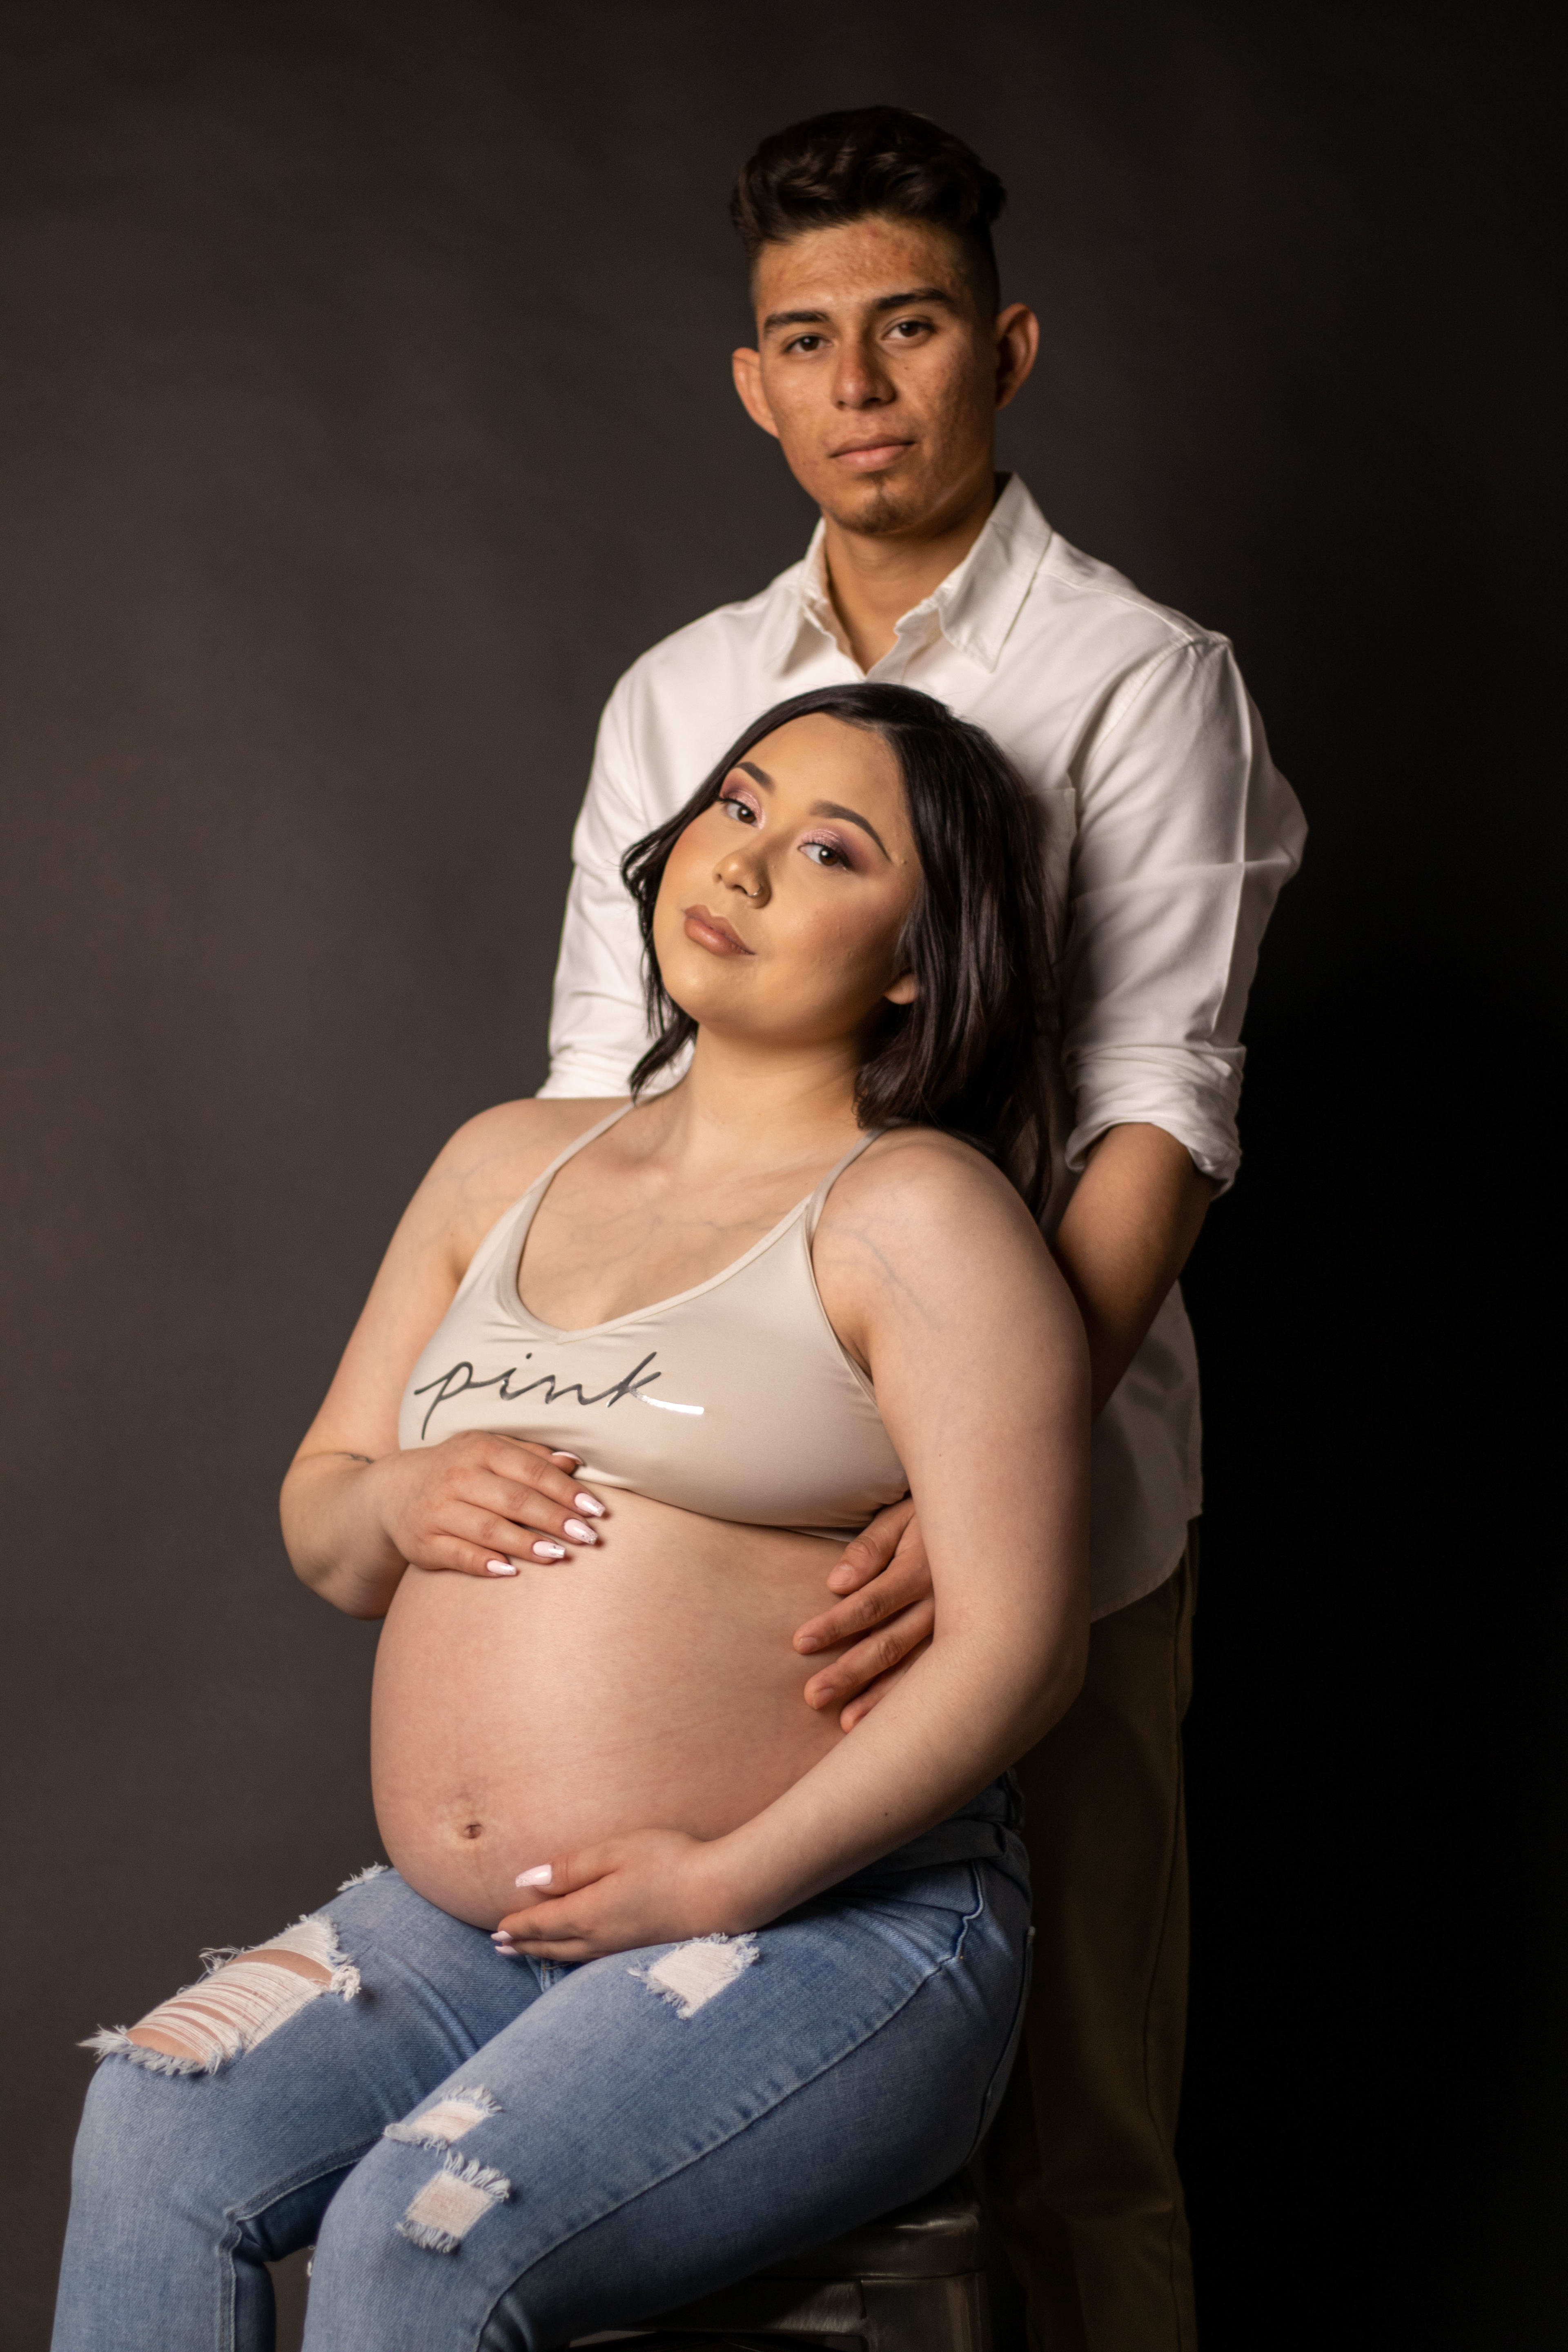 Maternity photo shoot of a pregnant woman on a stool with a man holding her from behind.